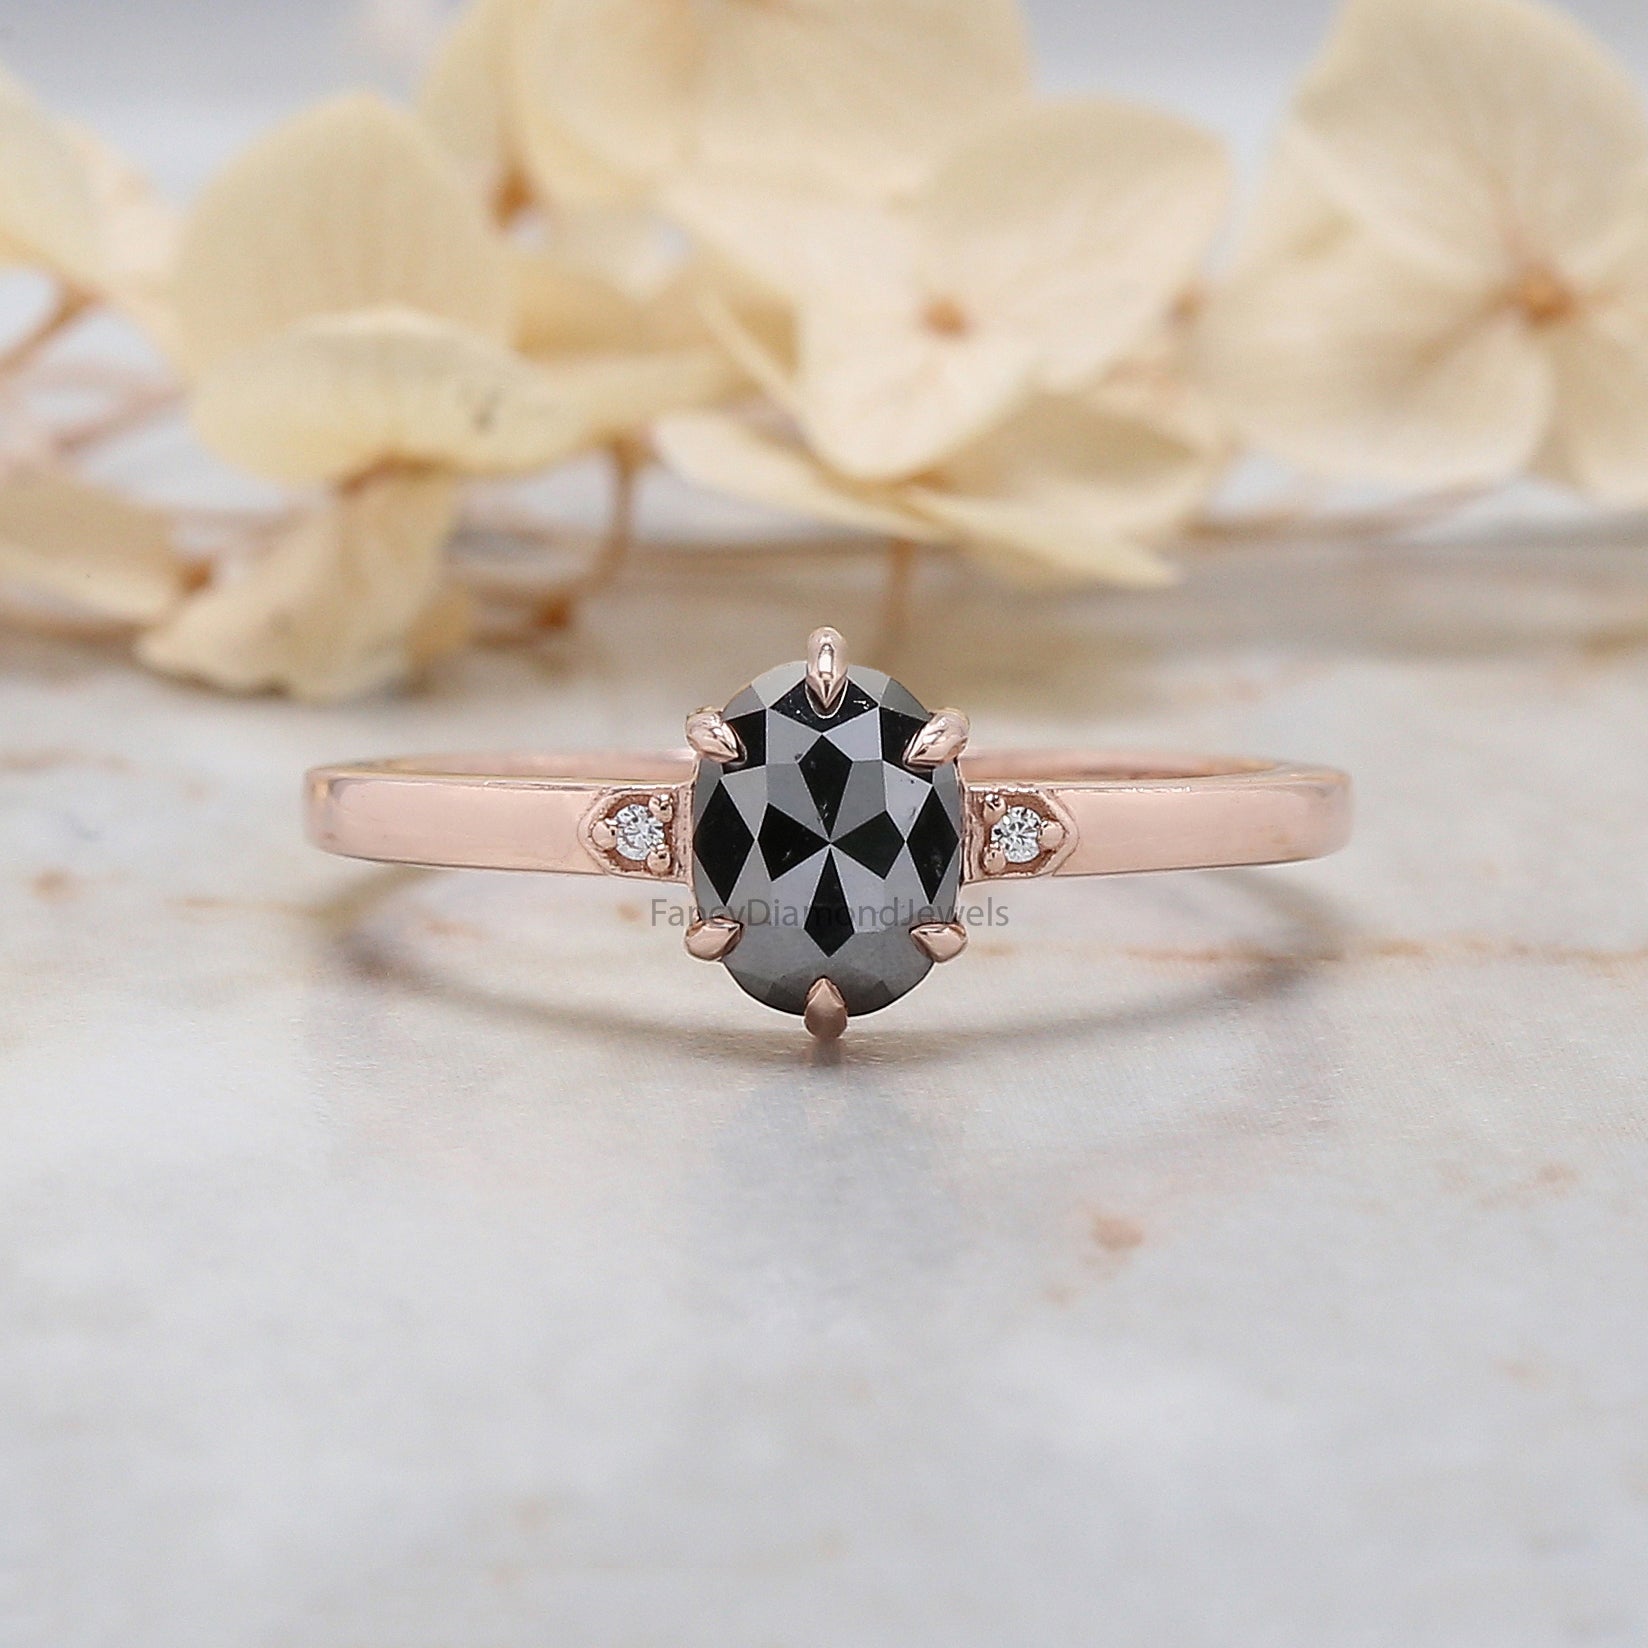 0.84 Ct Natural Oval Black Color Diamond Ring 6.57 MM Oval Cut Diamond Ring 14K Solid Rose Gold Silver Engagement Ring Oval Ring QN1977